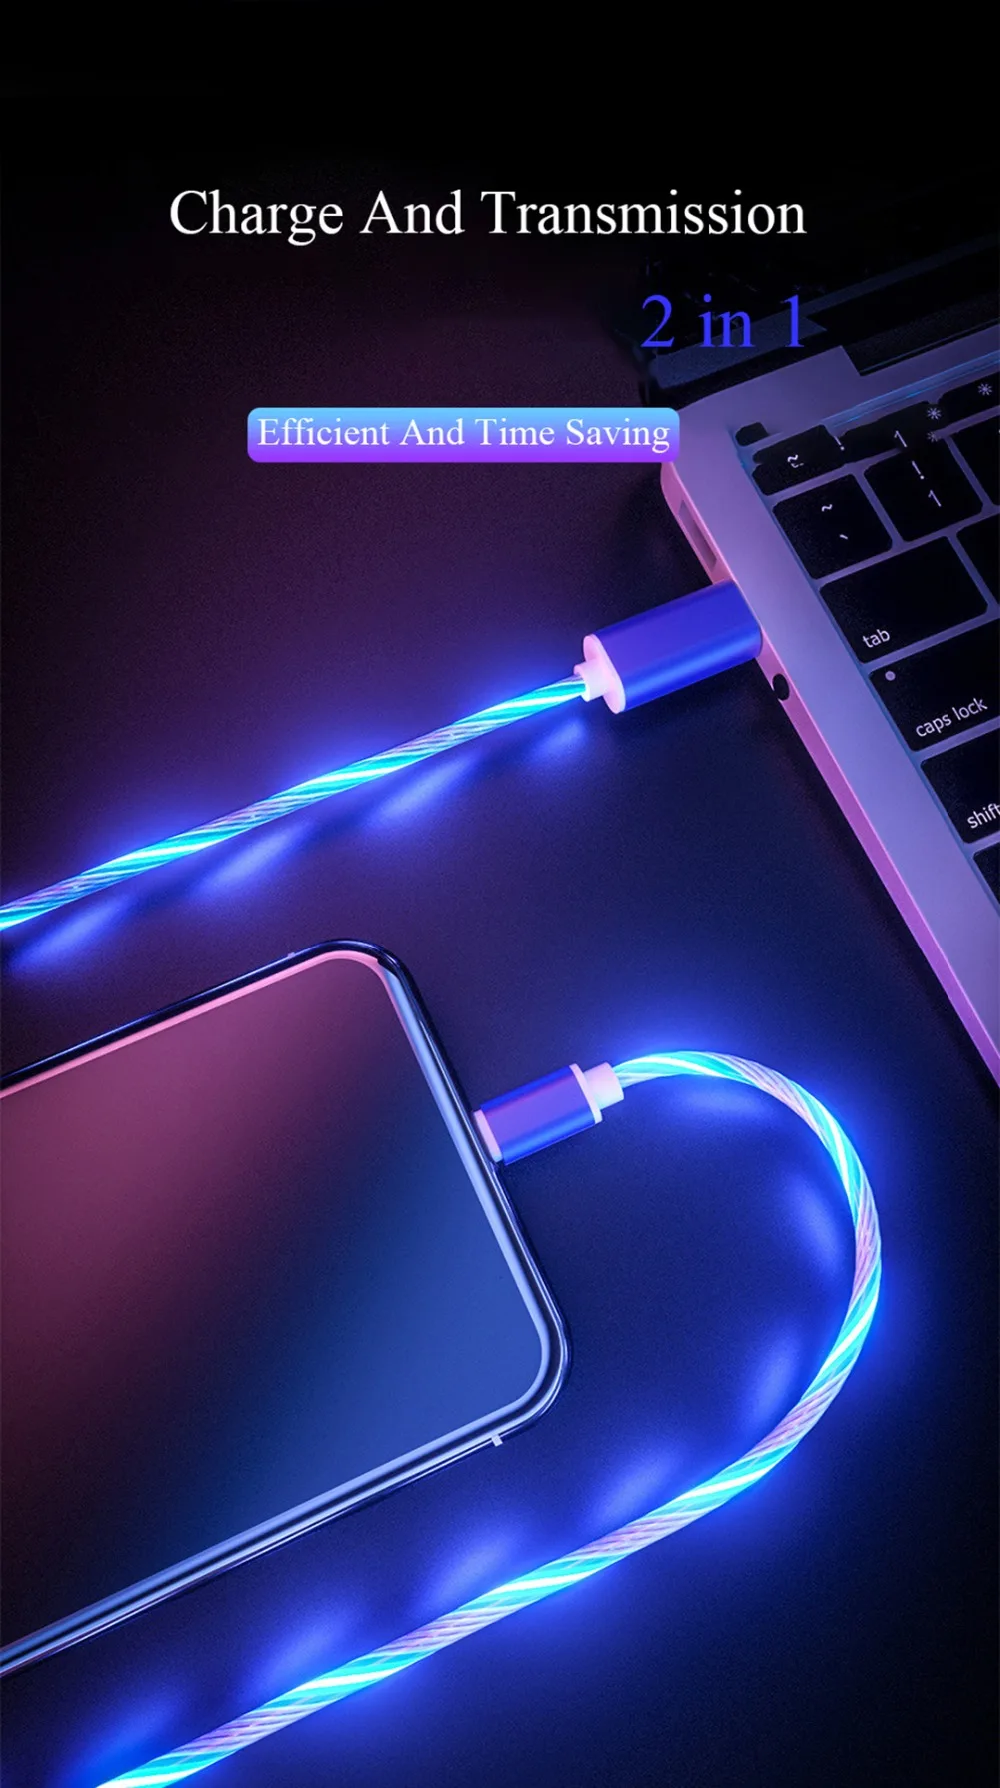 Flowing LED Glow Data USB Cable Charger Type C/Micro USB/8 Pin Charging Cable for iPhone X Samsung Galaxy S9 S8 Charge Wire Cord